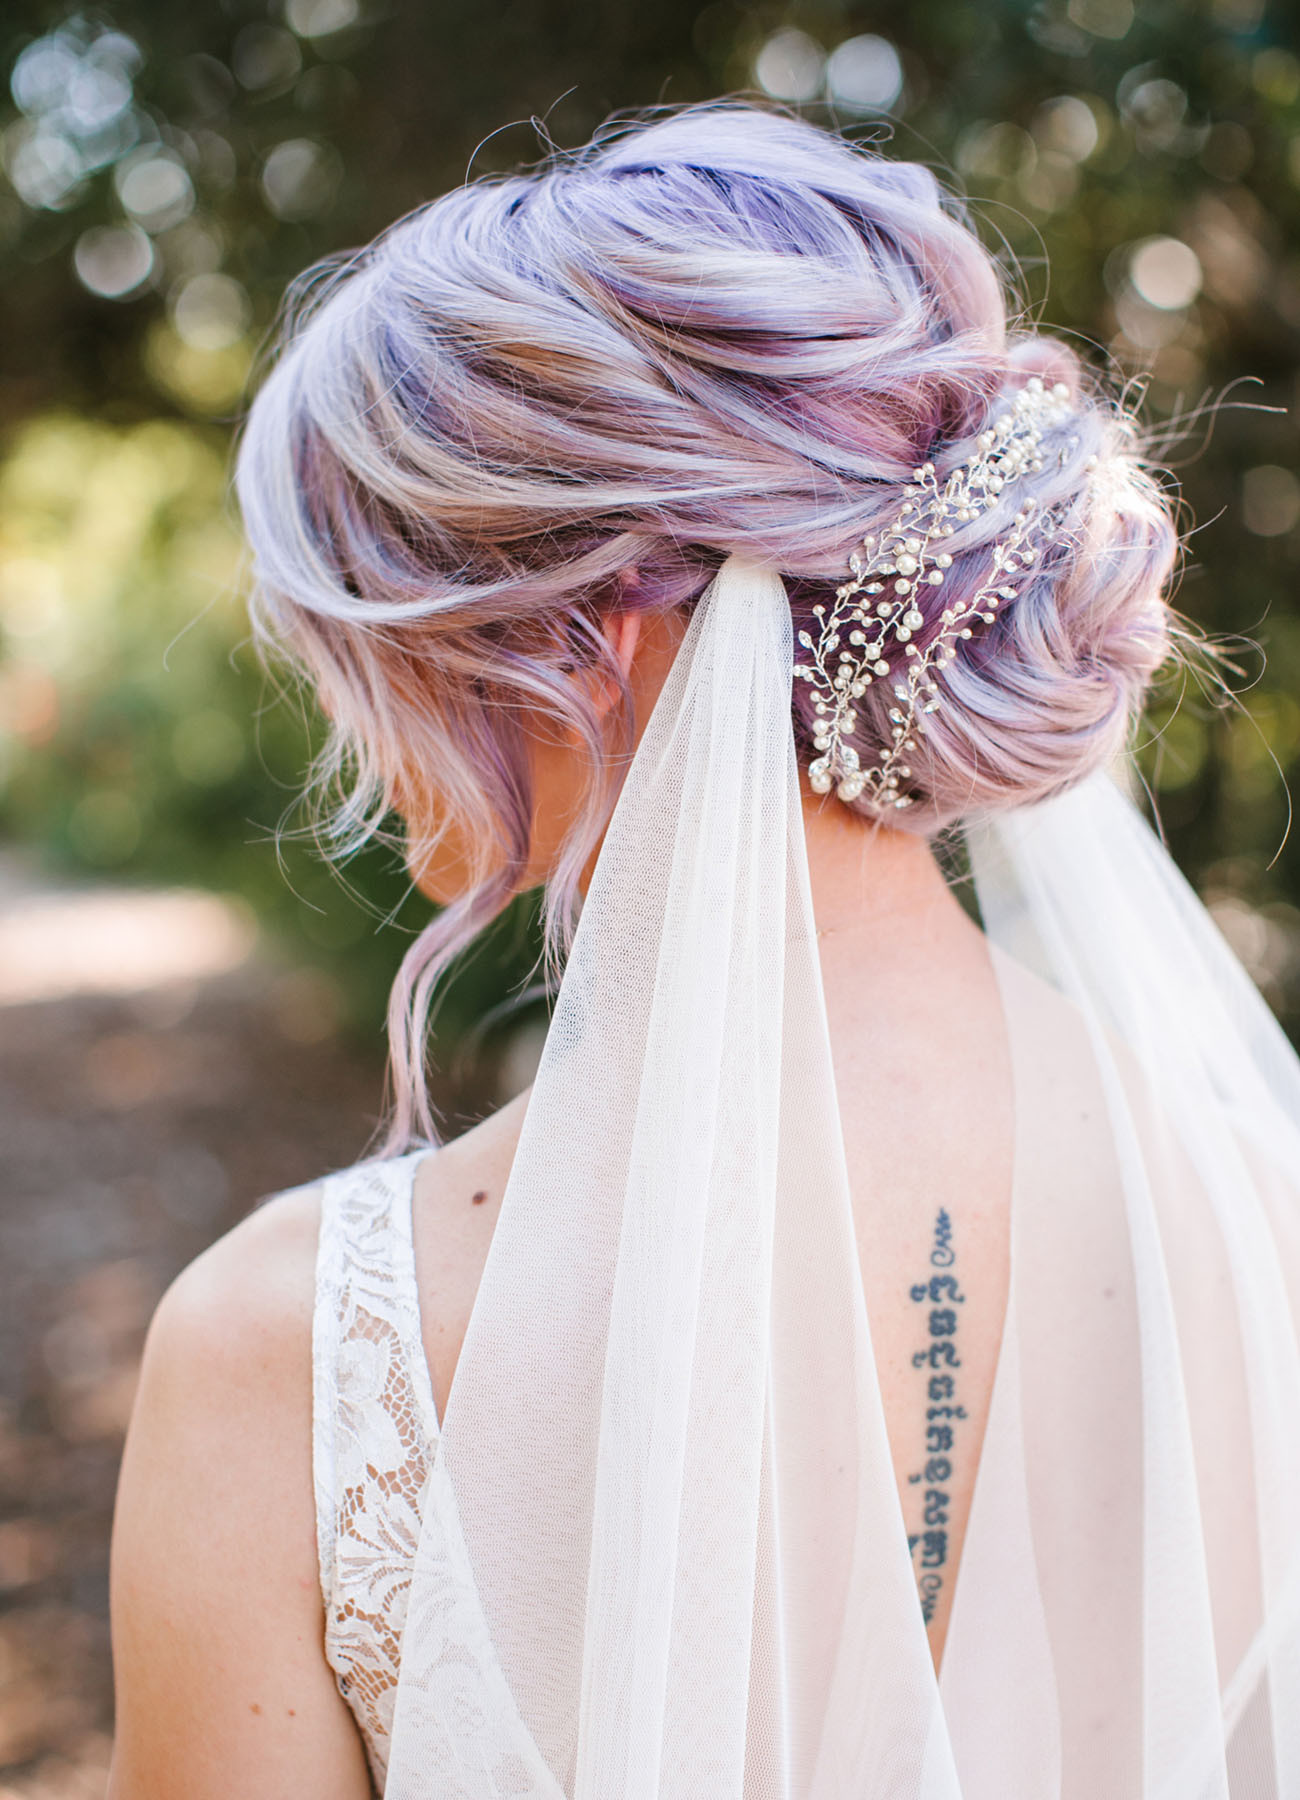 Hairstyle Ideas For Brides
 Trending Now Boho Chic Messy Bun Wedding Hairstyles